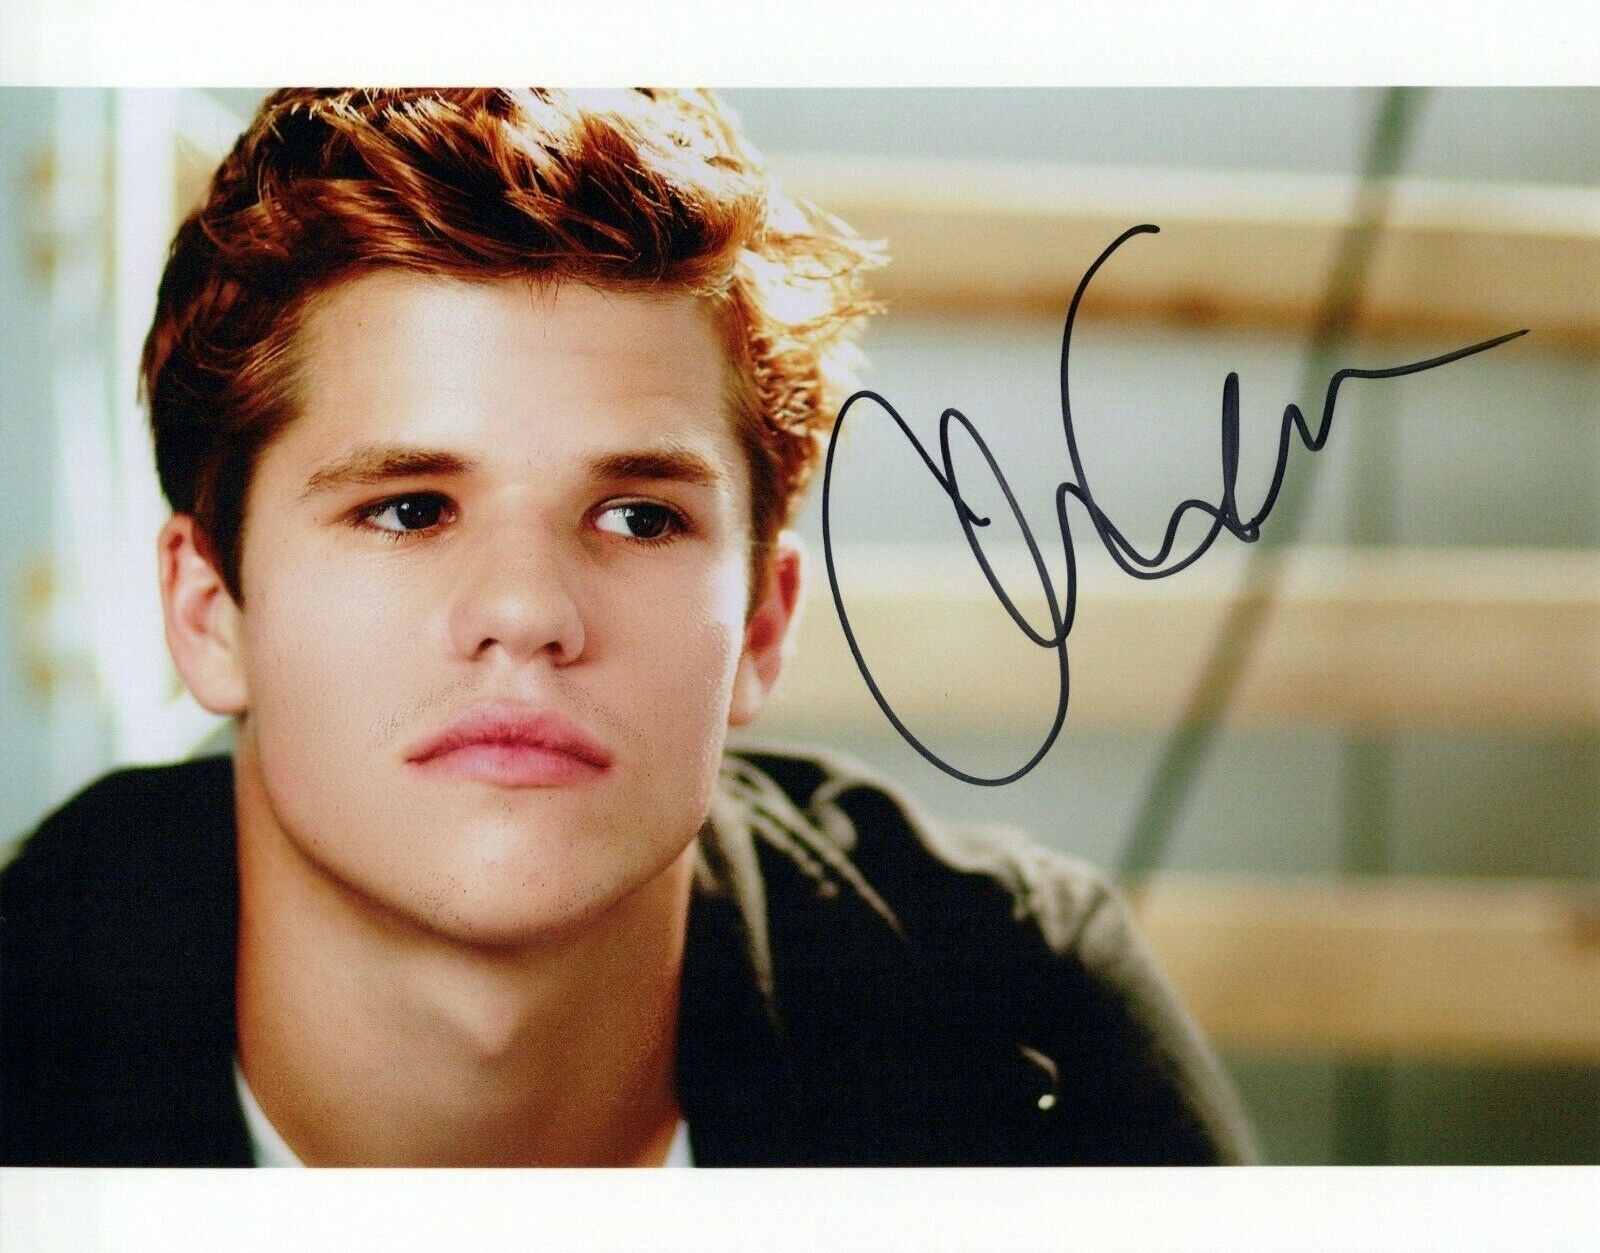 Charlie Carver head shot autographed Photo Poster painting signed 8x10 #2